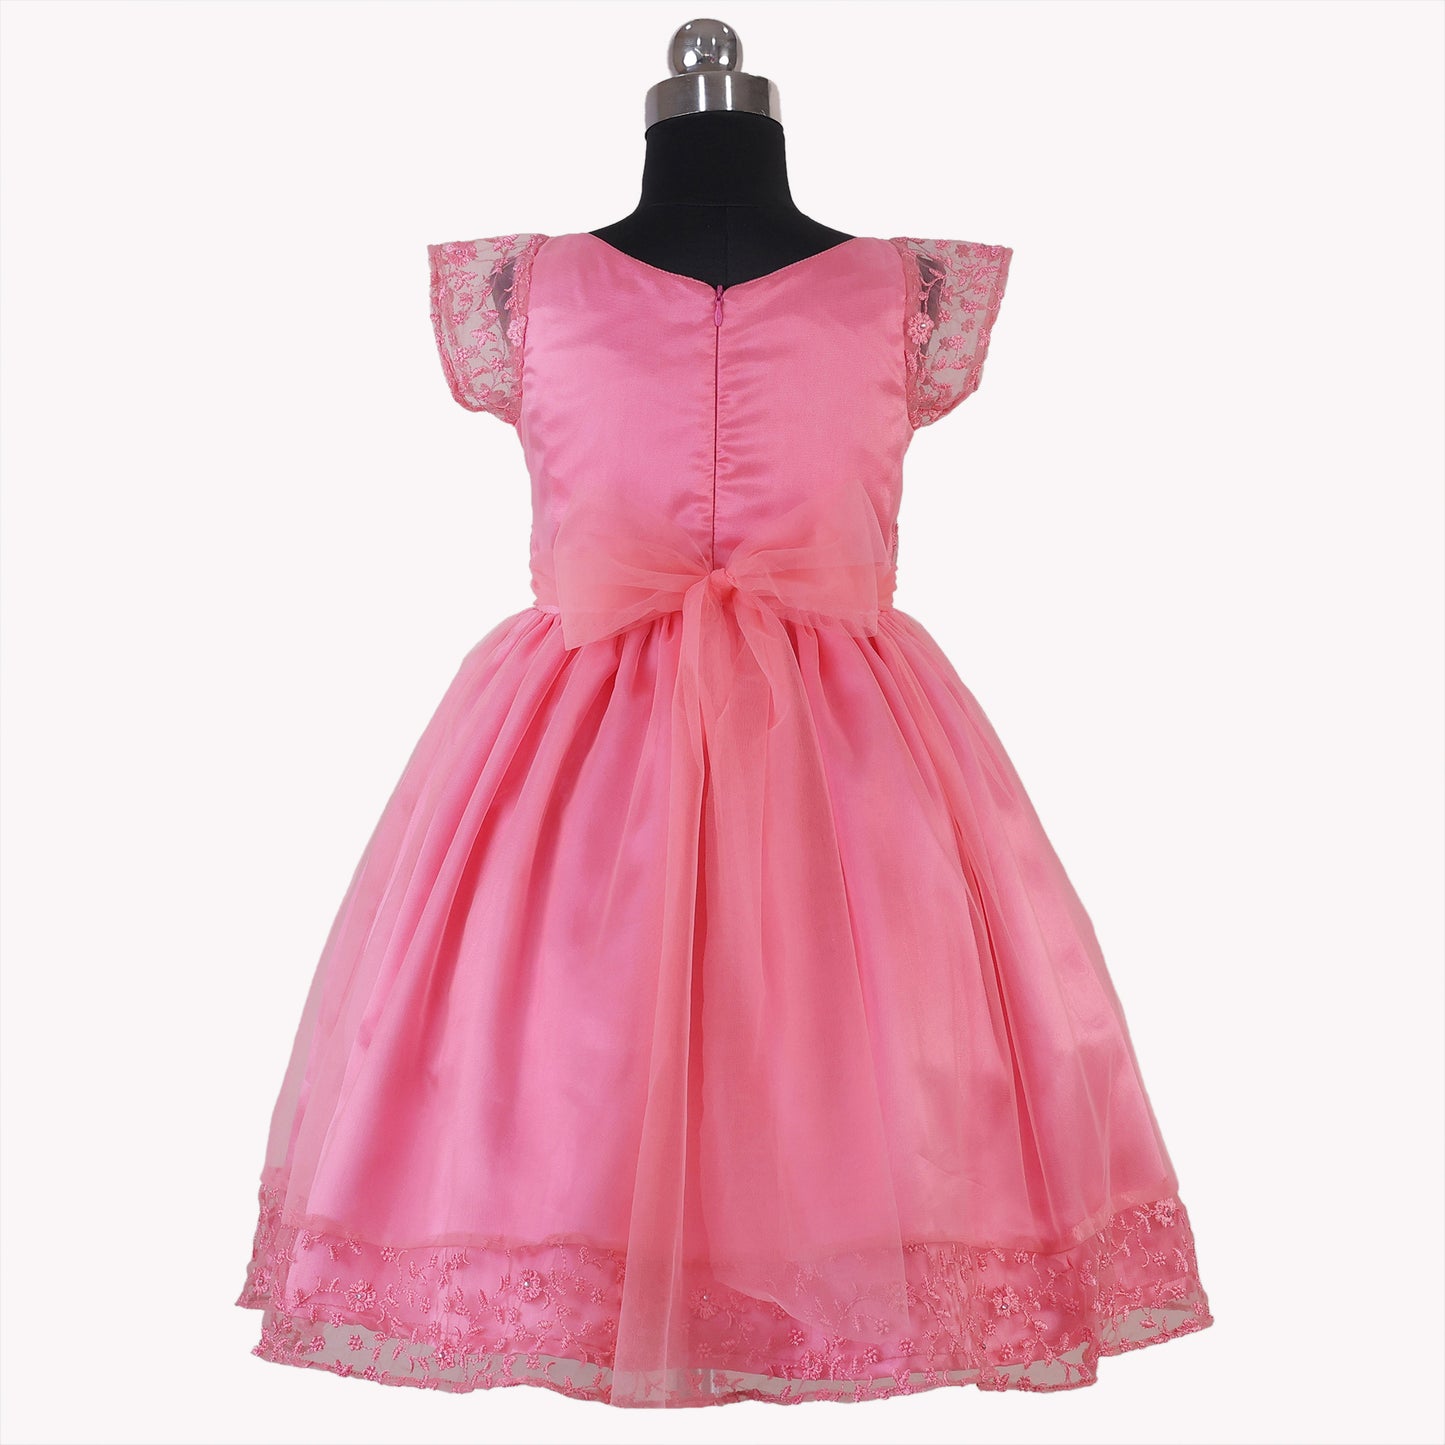 HEYKIDOO latest designer kids girls stylish comfortable party frock 2023 Knee length birthday frock dress floral embroidered satin elegant pink fashionable 7-year best quality unique gown flower dress